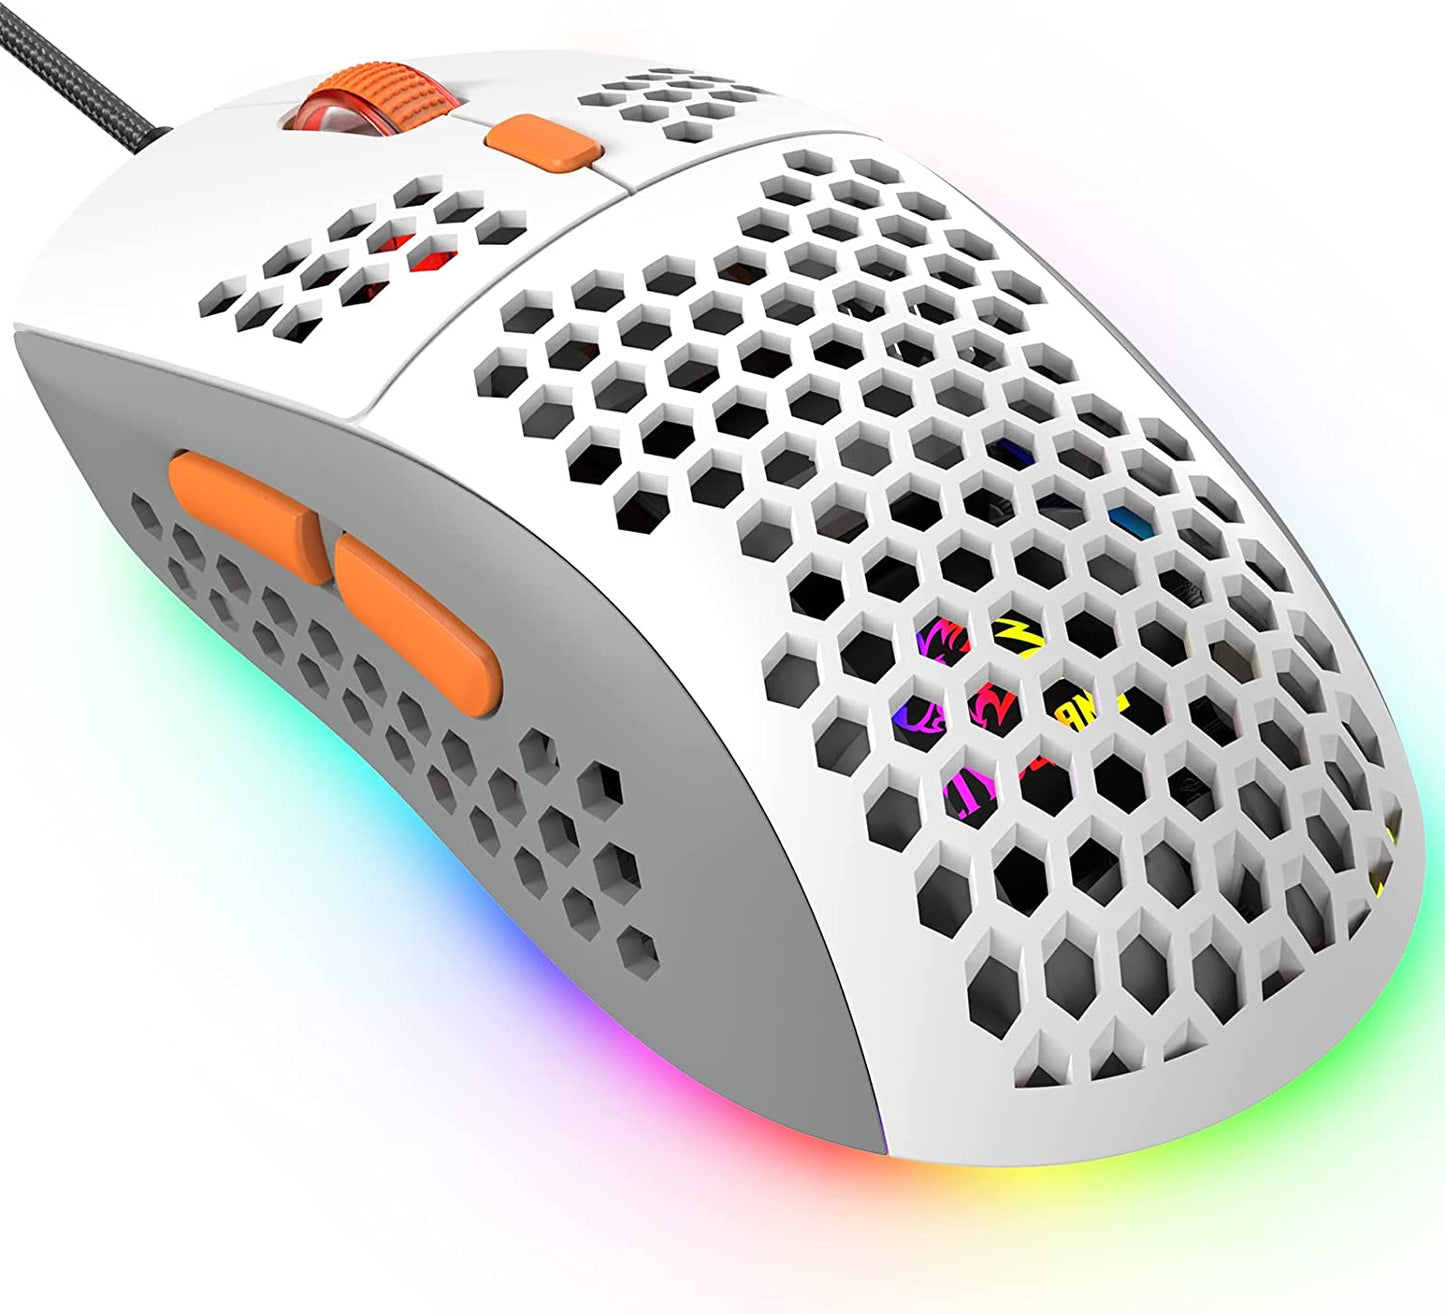 Wired Gaming Mouse LED Light USB Mouse with Honeycomb Shell 6400 DPI Gaming  Mice